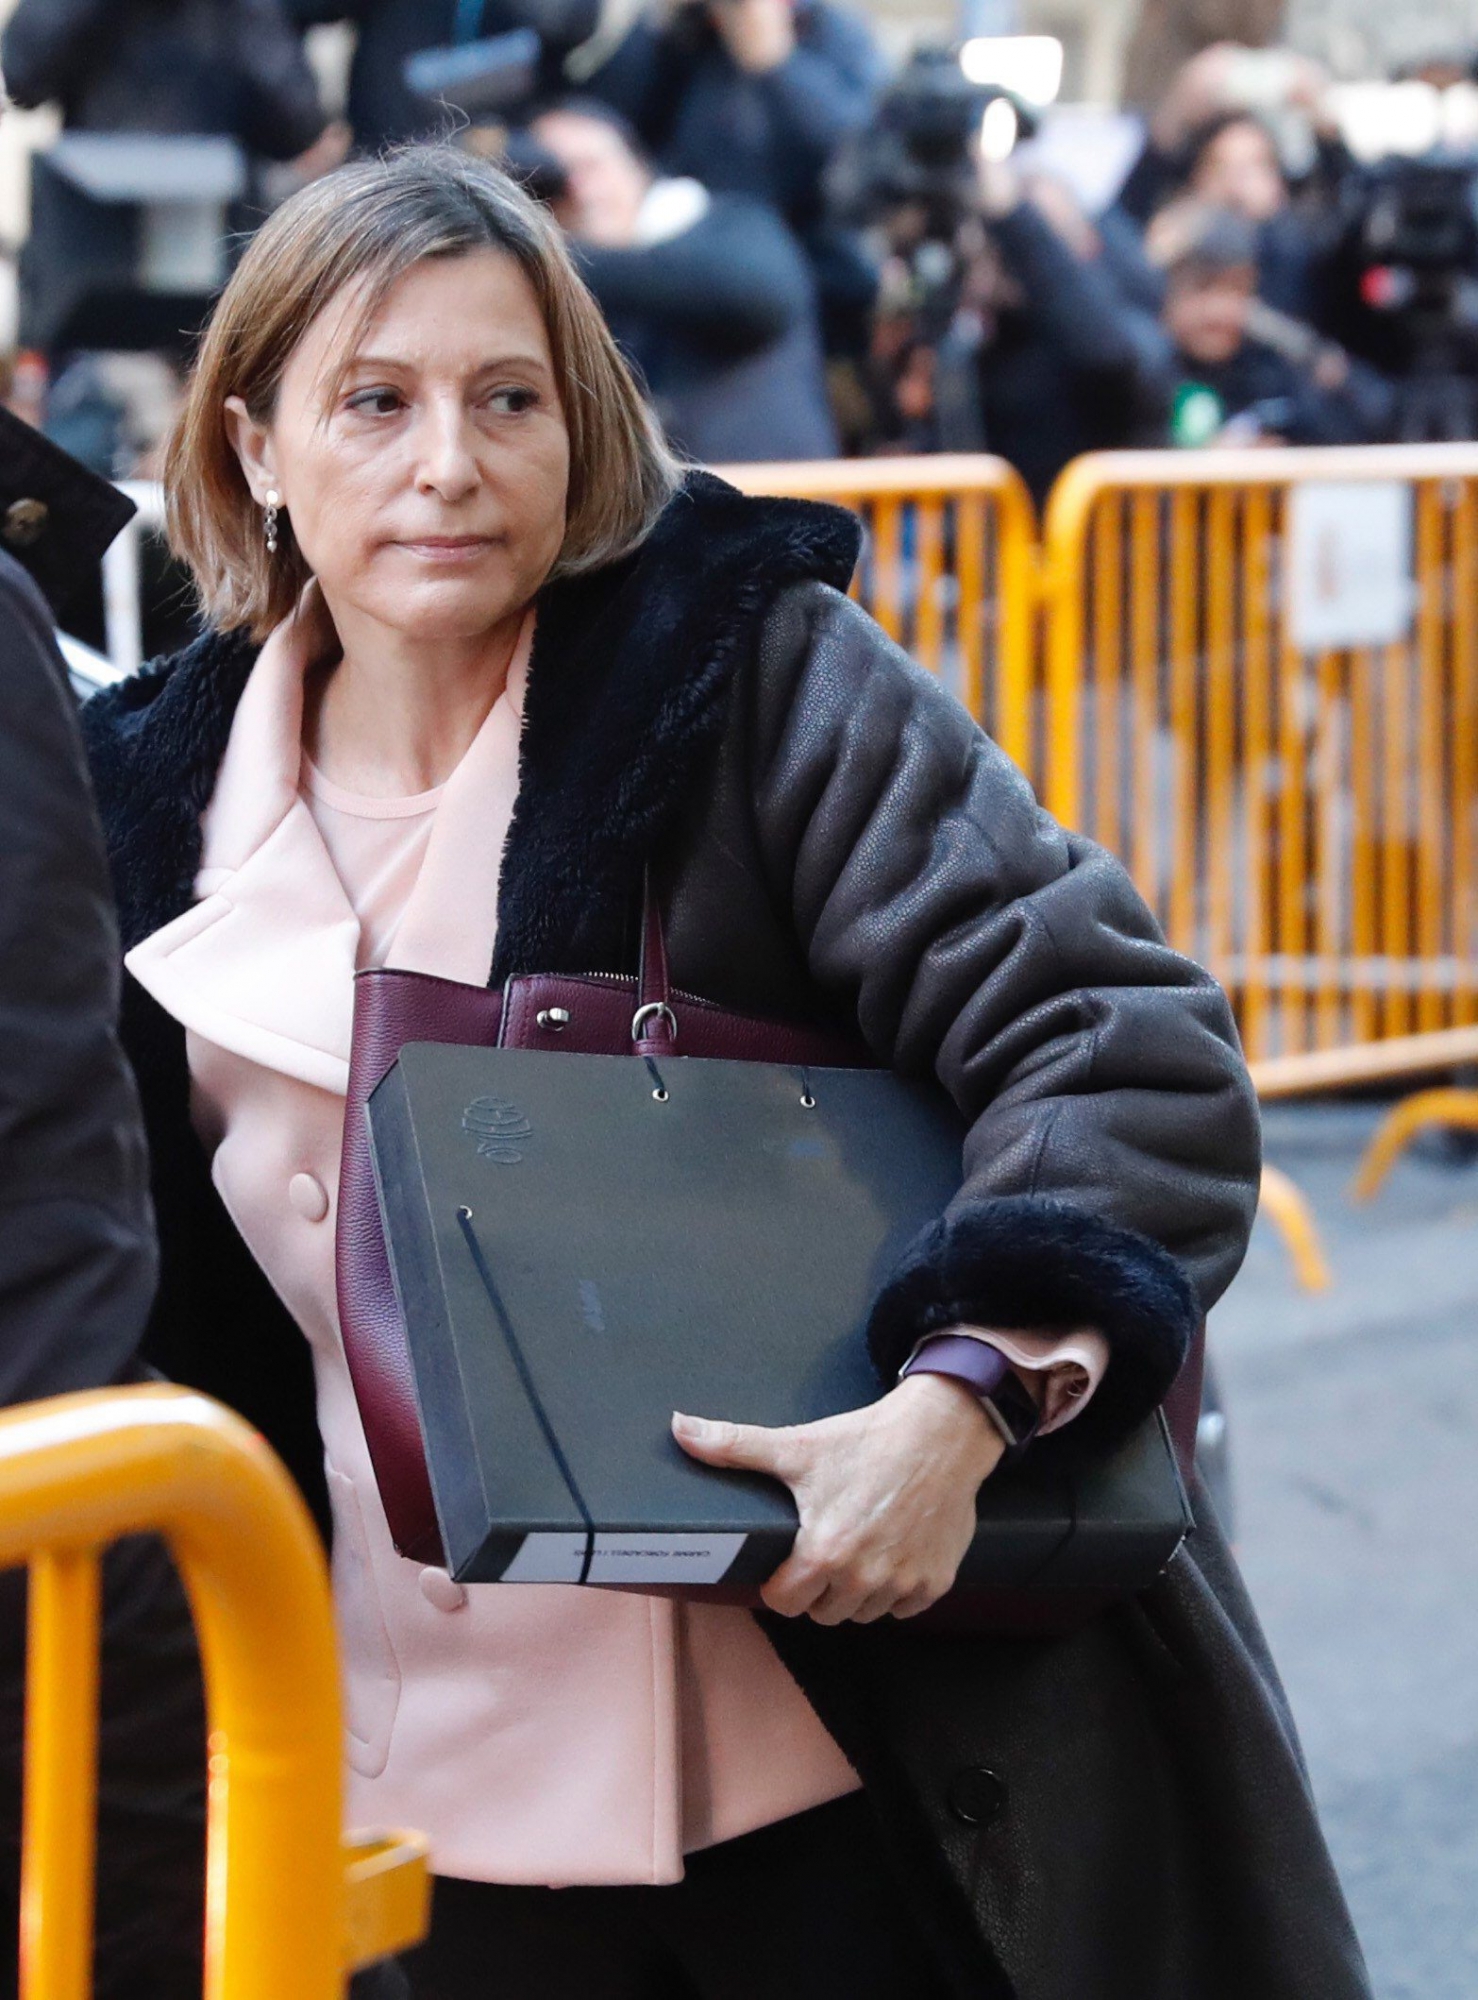 epa06317192 Speaker of the Catalan regional Parliament, Carme Forcadell (C), arrives at the Supreme Court in Madrid, Spain, 09 November 2017, where Carme Forcadell and five other lawmakers from the Catalan chamber, are to appear before the judge at the Court on rebellion, sedition and embezzlement charges. The Spanish National Court initiated legal proceedings against Catalan politicians involved in the declaration of independence passed in the regional parliament on 27 October 2017.  EPA/ANGEL DIAZ SPAIN CATALONIA JUSTICE